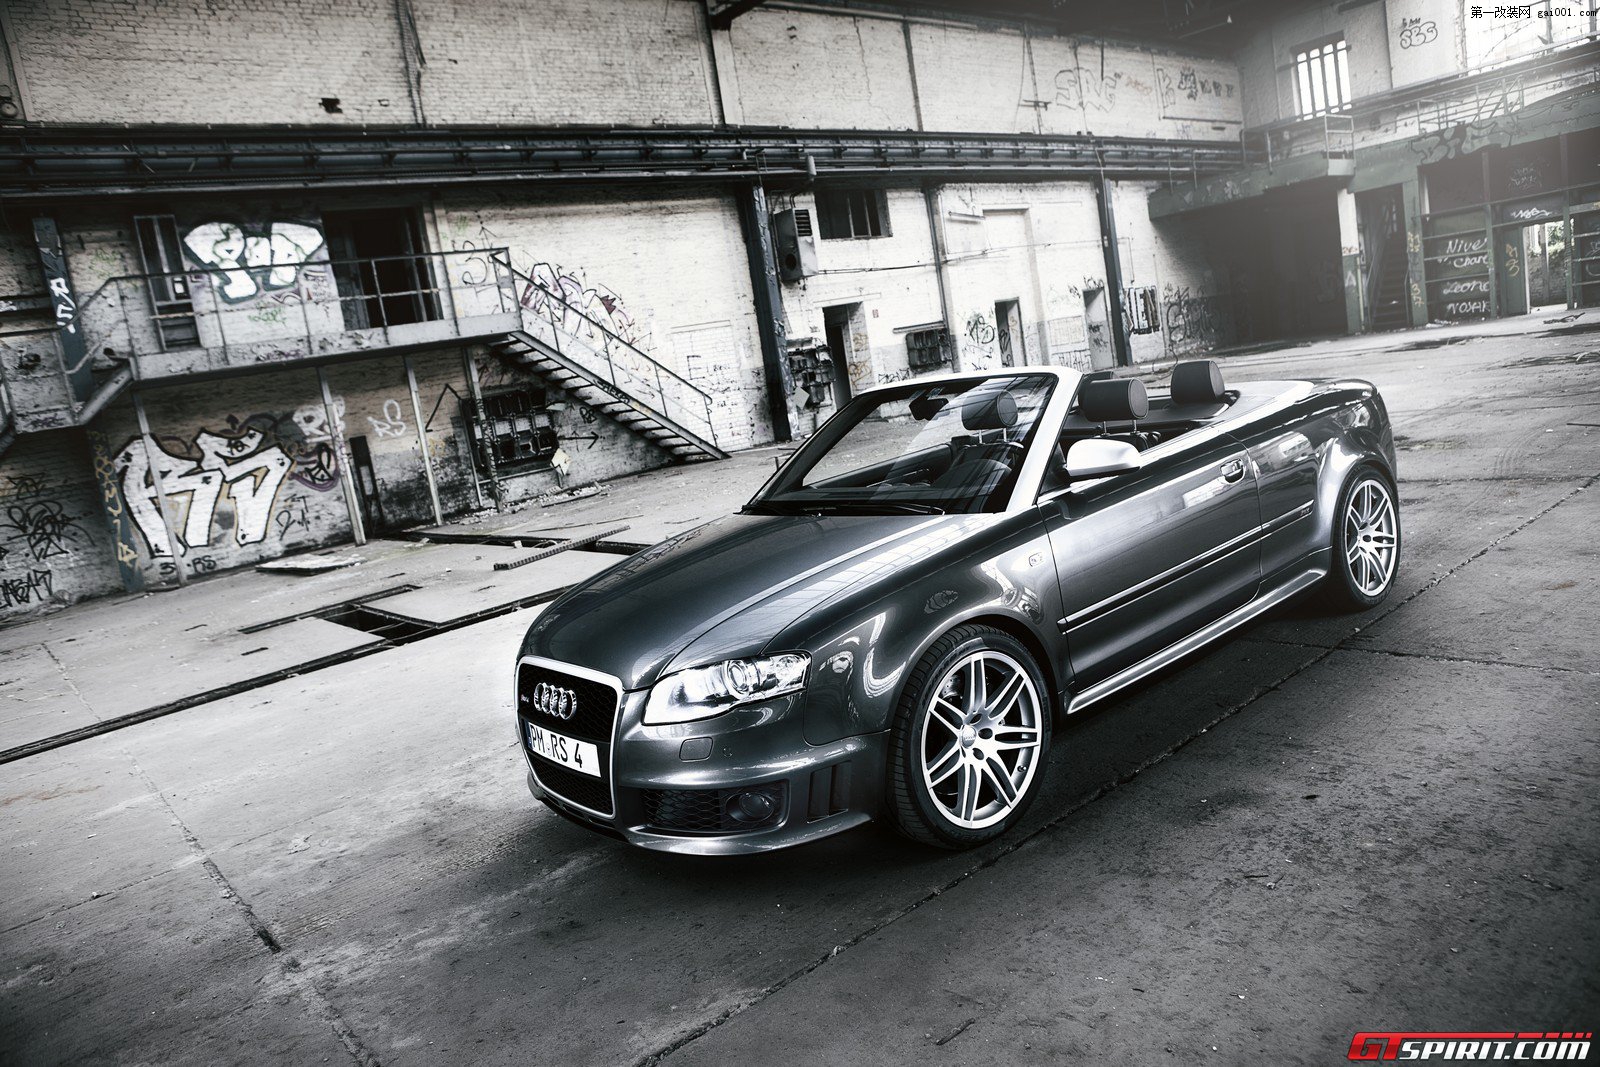 audi-rs4-convertible-with-mtm-exhaust-system-006.jpg